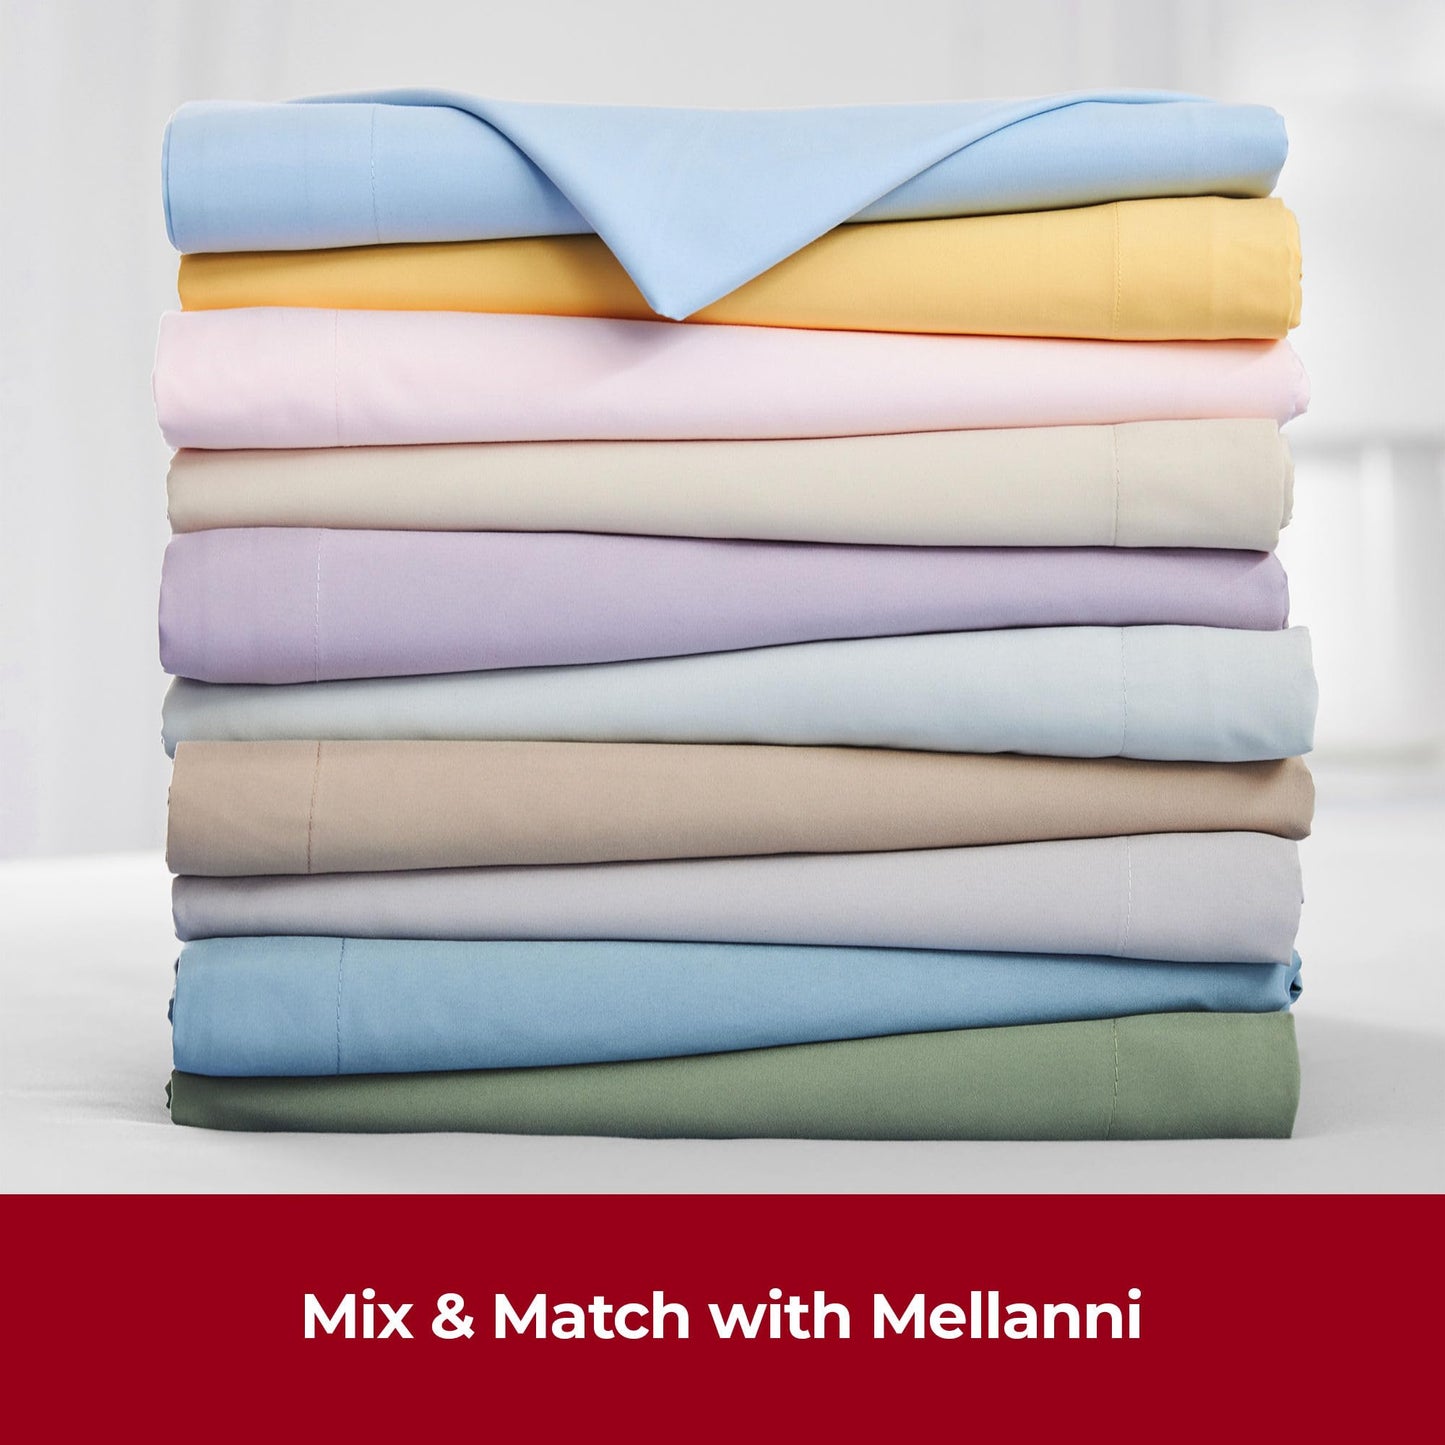 Mellanni Queen Sheet Set - 4 PC Iconic Collection Bedding Sheets & Pillowcases - Extra Soft, Cooling Bed Sheets - Deep Pocket up to 16 inch - Wrinkle, Fade, Stain Resistant (Queen, Blue Hydrangea)